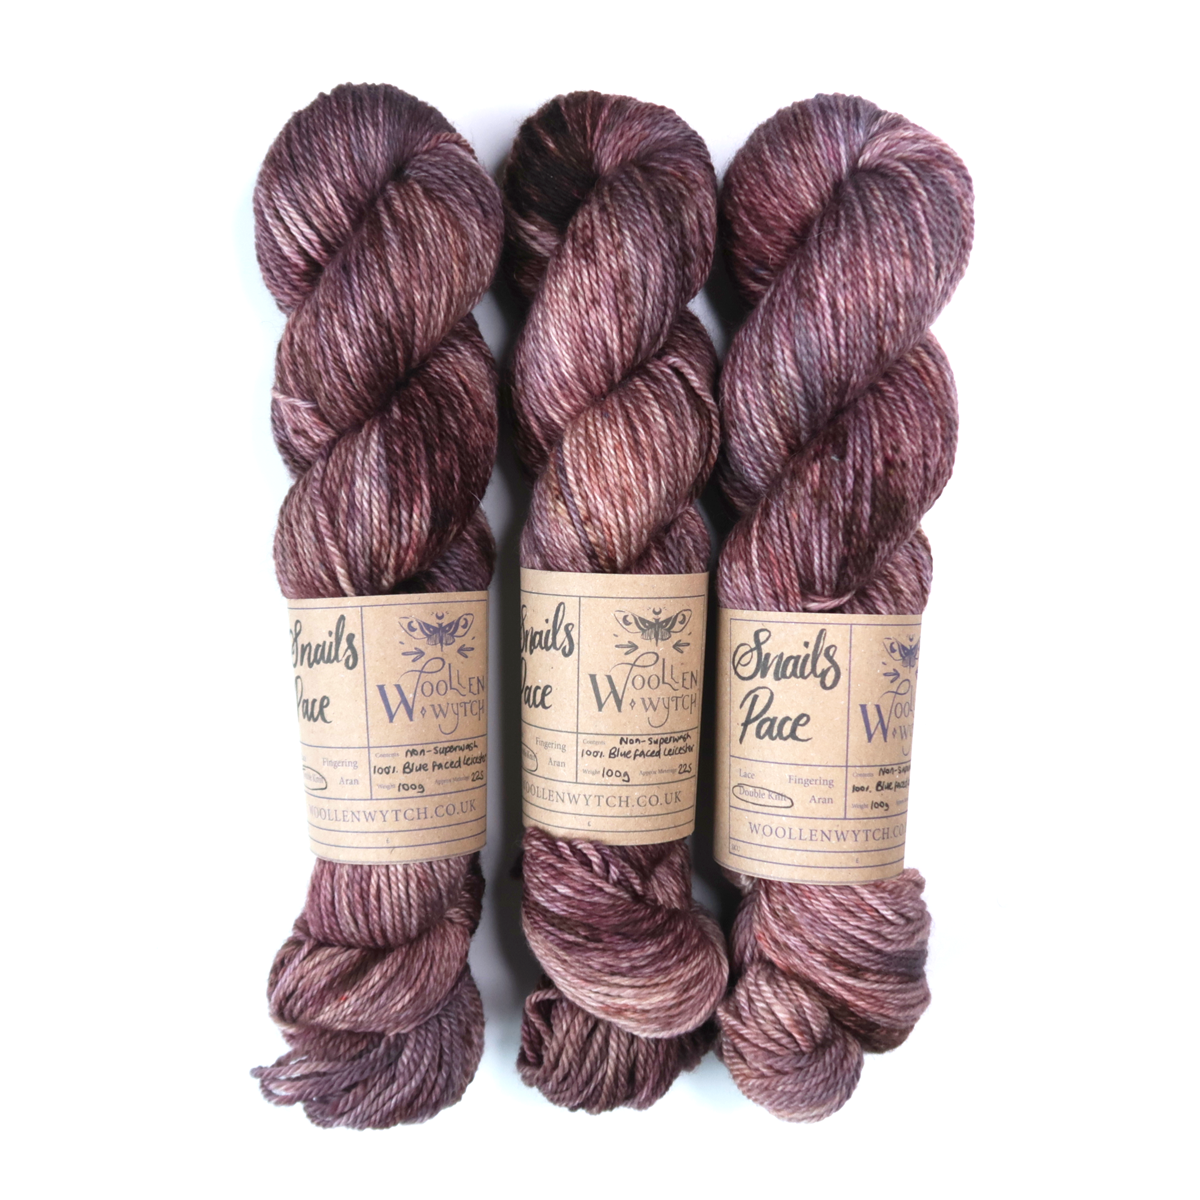 Purple and brown hand dyed yarn double knit by Woollen Wytch in Bristol